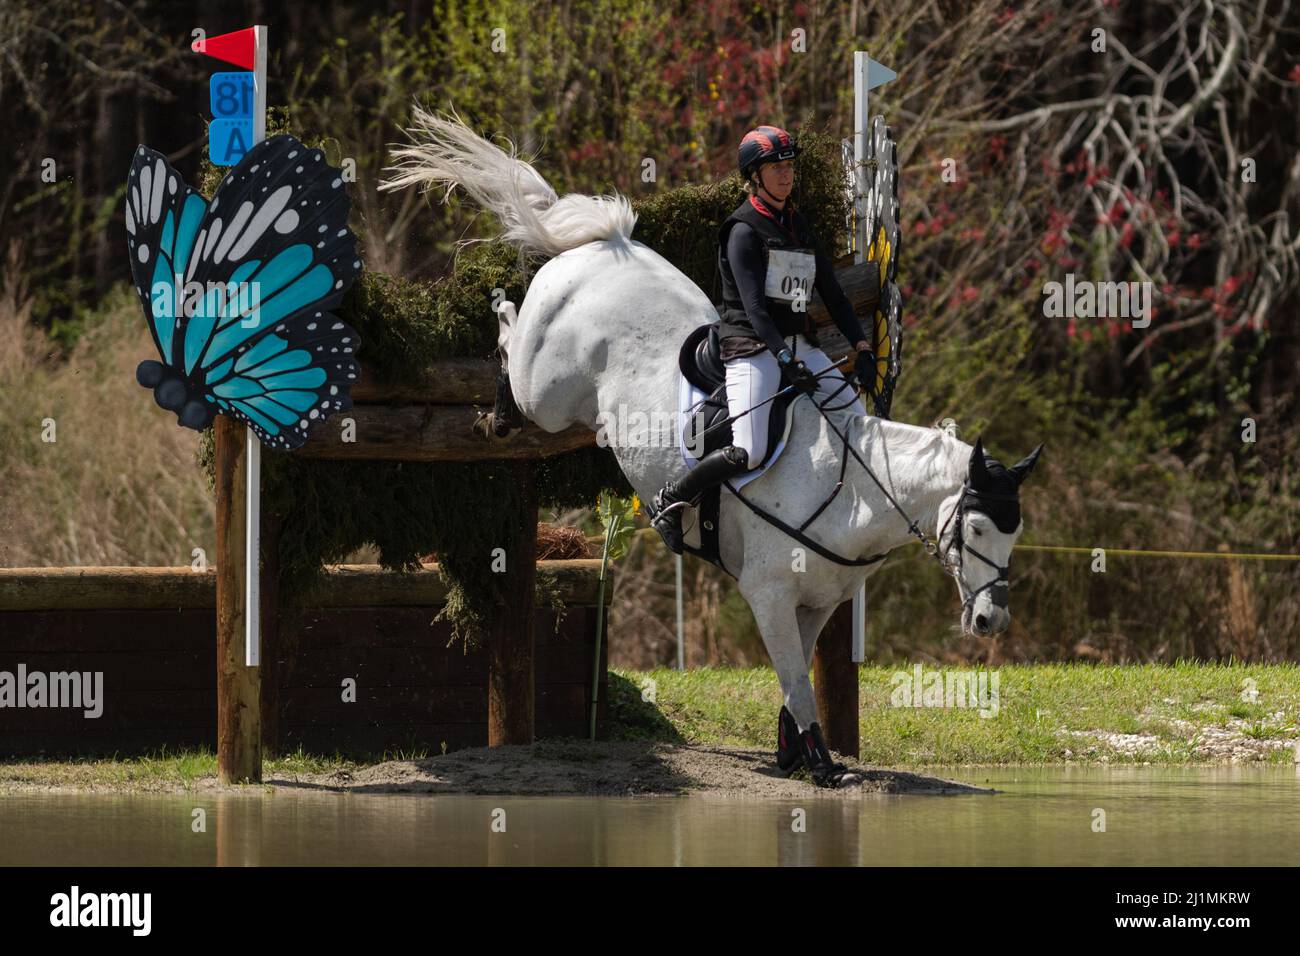 Raeford, North Carolina, USA. 26th Mar, 2022. CAROLINE MARTIN of the United States riding Islandwood Captain Jack competes in CCI4* cross country at the Carolina International CCI and Horse Trial, March 26, 2022 at Carolina Horse Park in Raeford, North Carolina. The Carolina International CCI and Horse Trial is one of North America's premier eventing competitions for national and international eventing combinations, hosting CCI1*-S through CCI4*-S levels and National levels of Training through Advanced. (Credit Image: © Timothy L. Hale/ZUMA Press Wire) Stock Photo